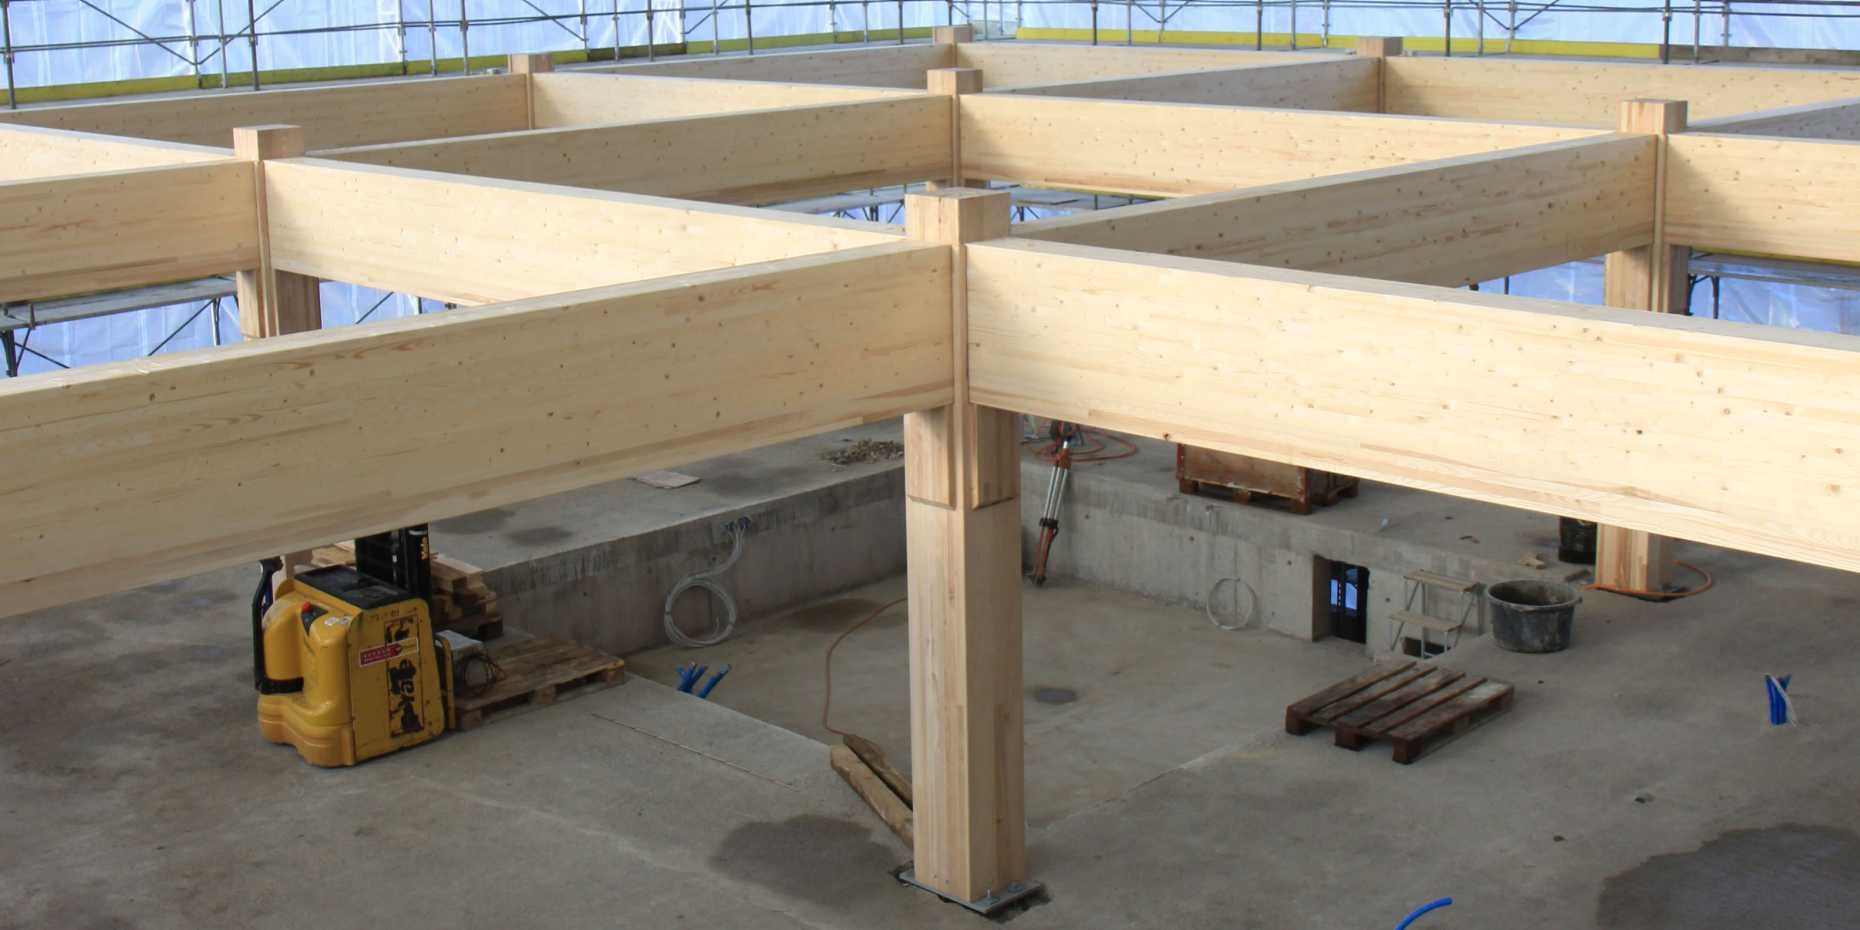 Enlarged view: frame construction